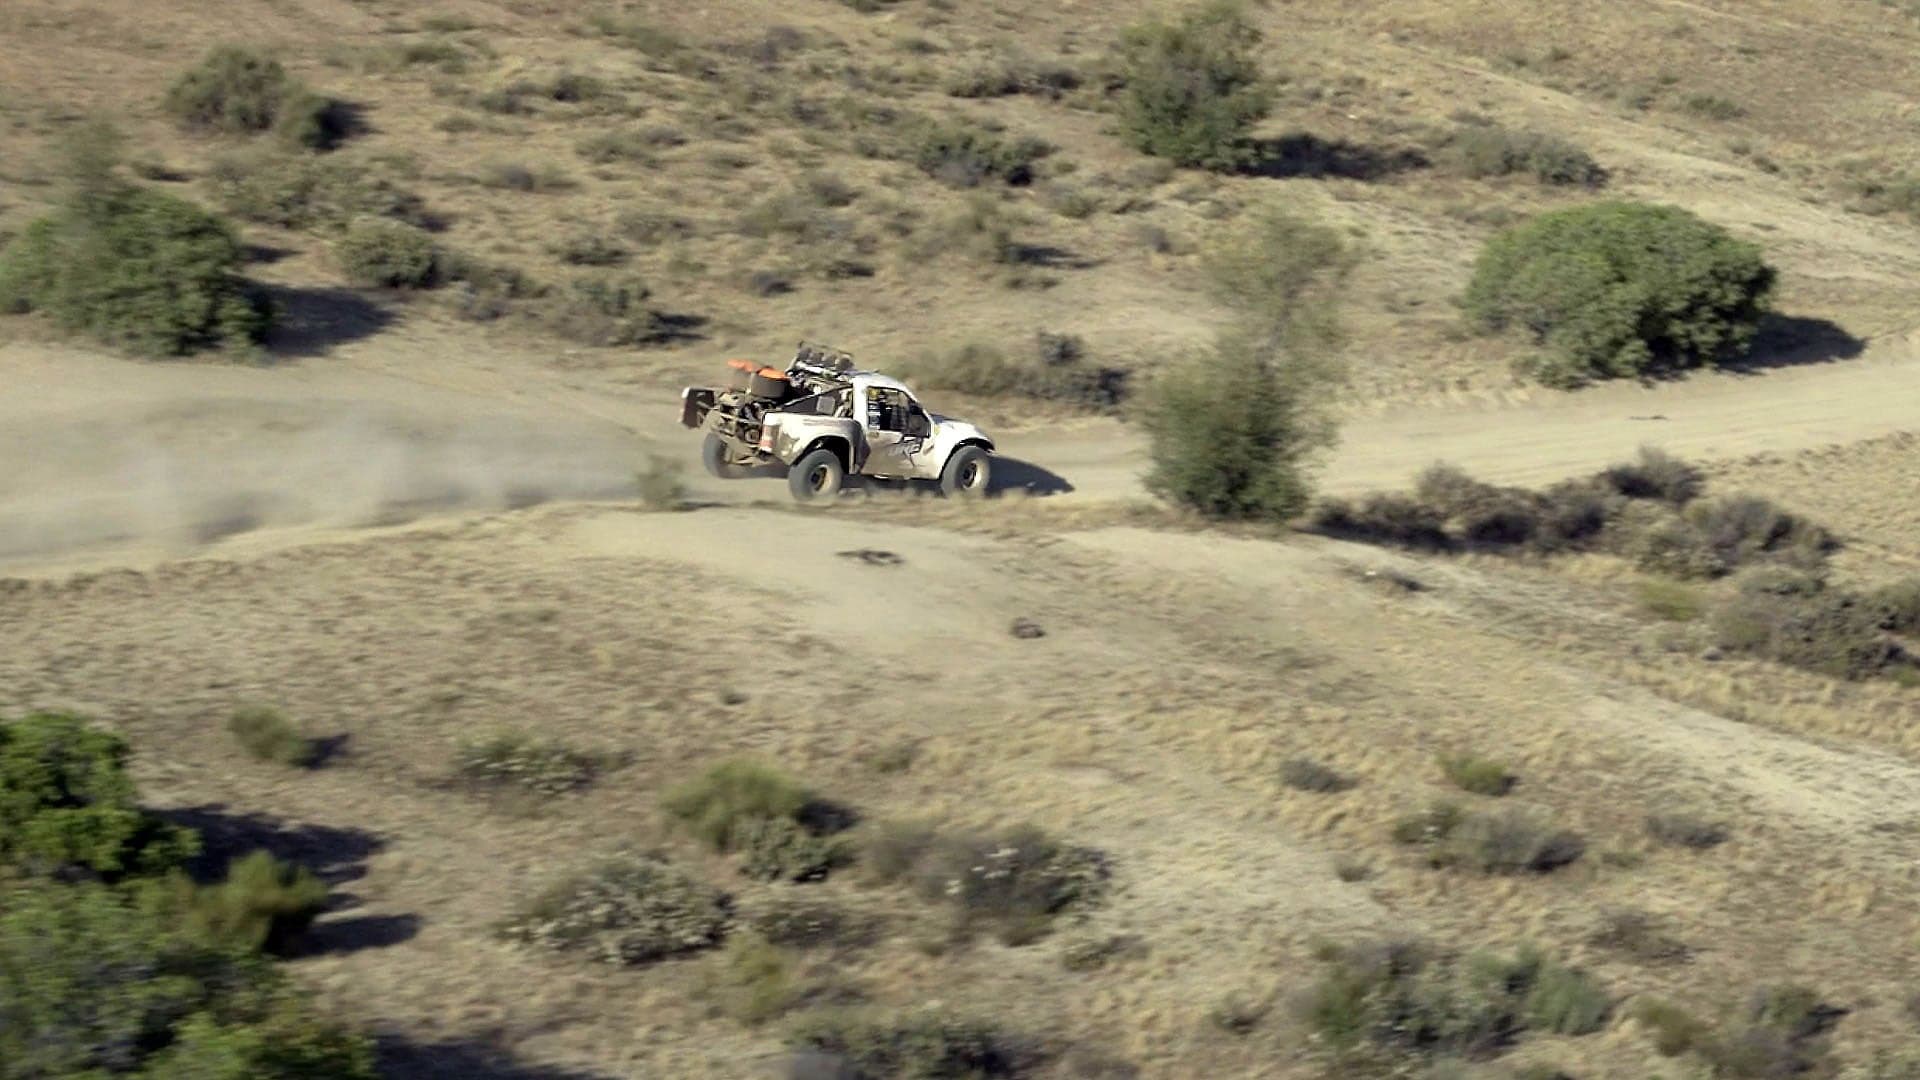 The Baja 500 Turns Into a Car Chase Through a Wildfire